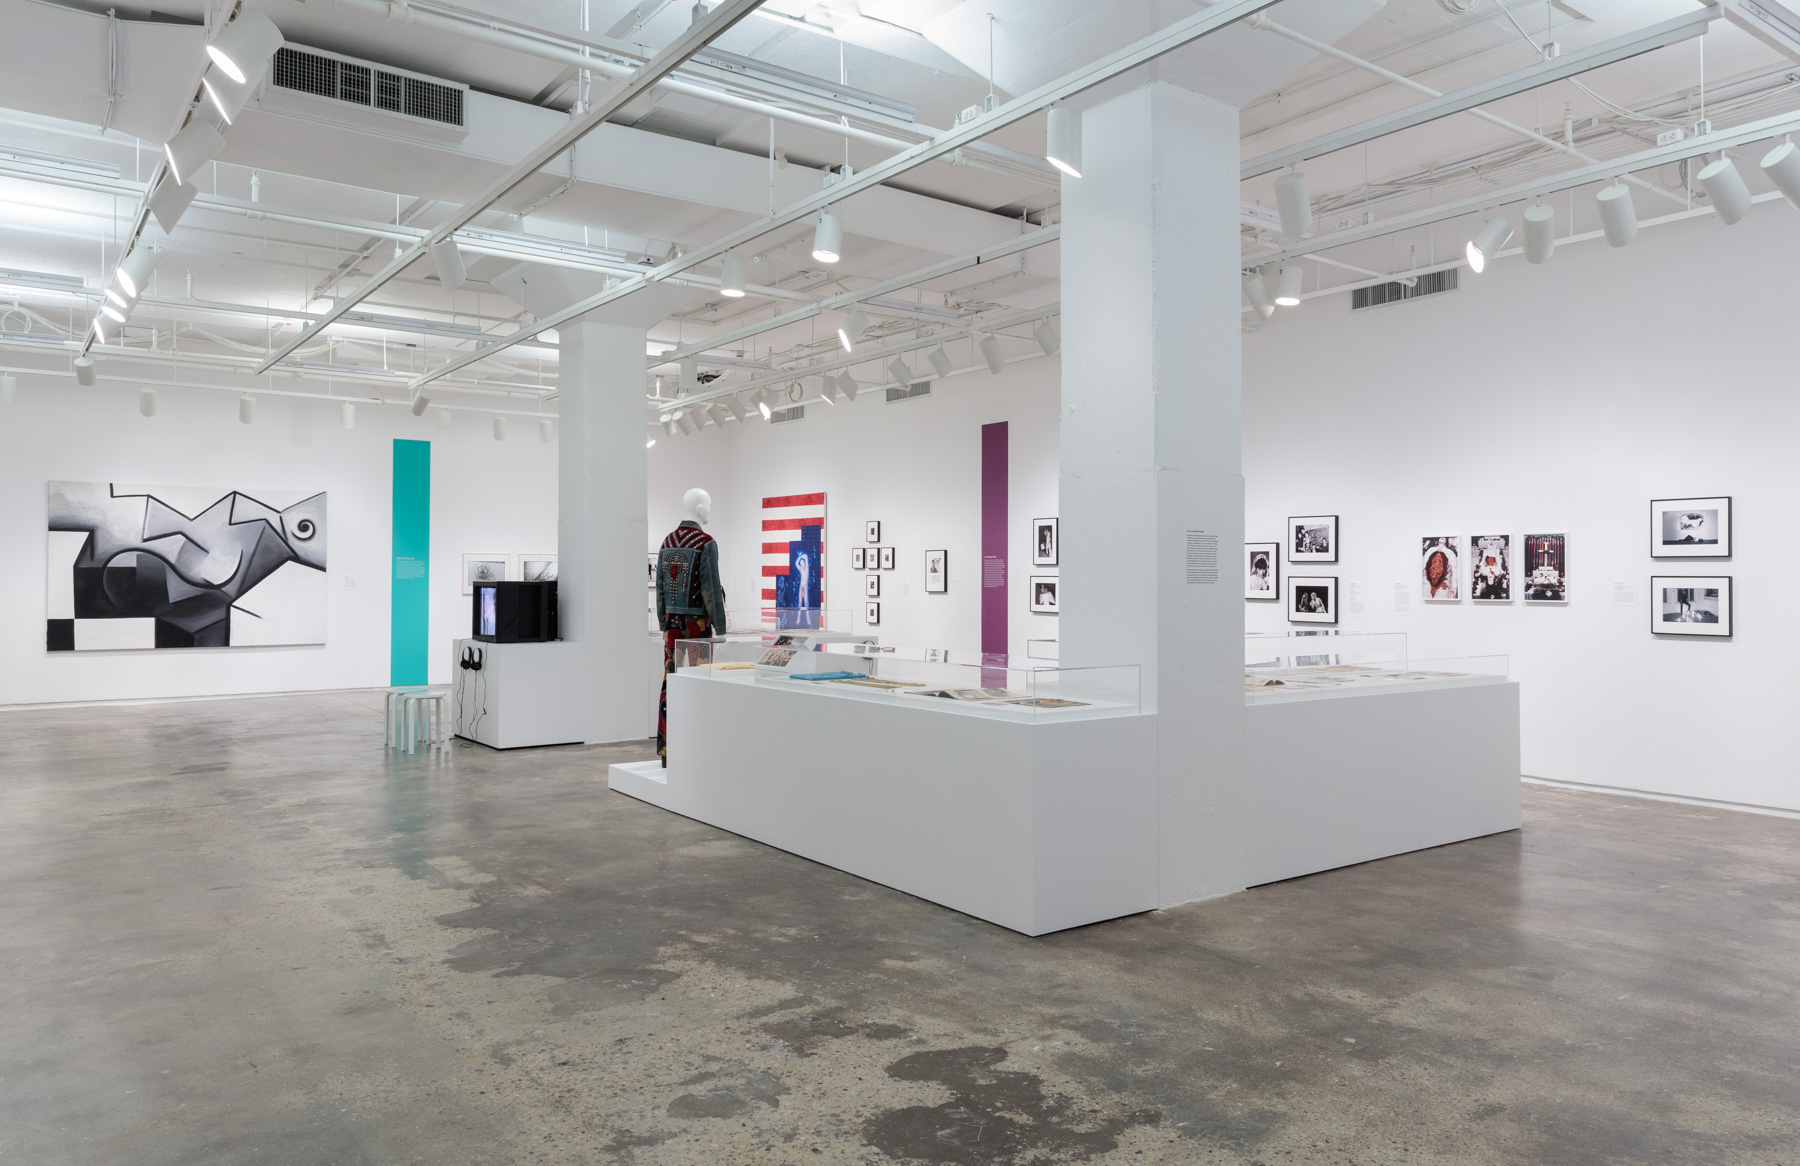  Installation view of  Axis Mundo: Queer Networks in Chicano L.A.  at 205 Hudson Gallery. Photo by Stan Narten. Courtesy of Hunter College Art Galleries. 